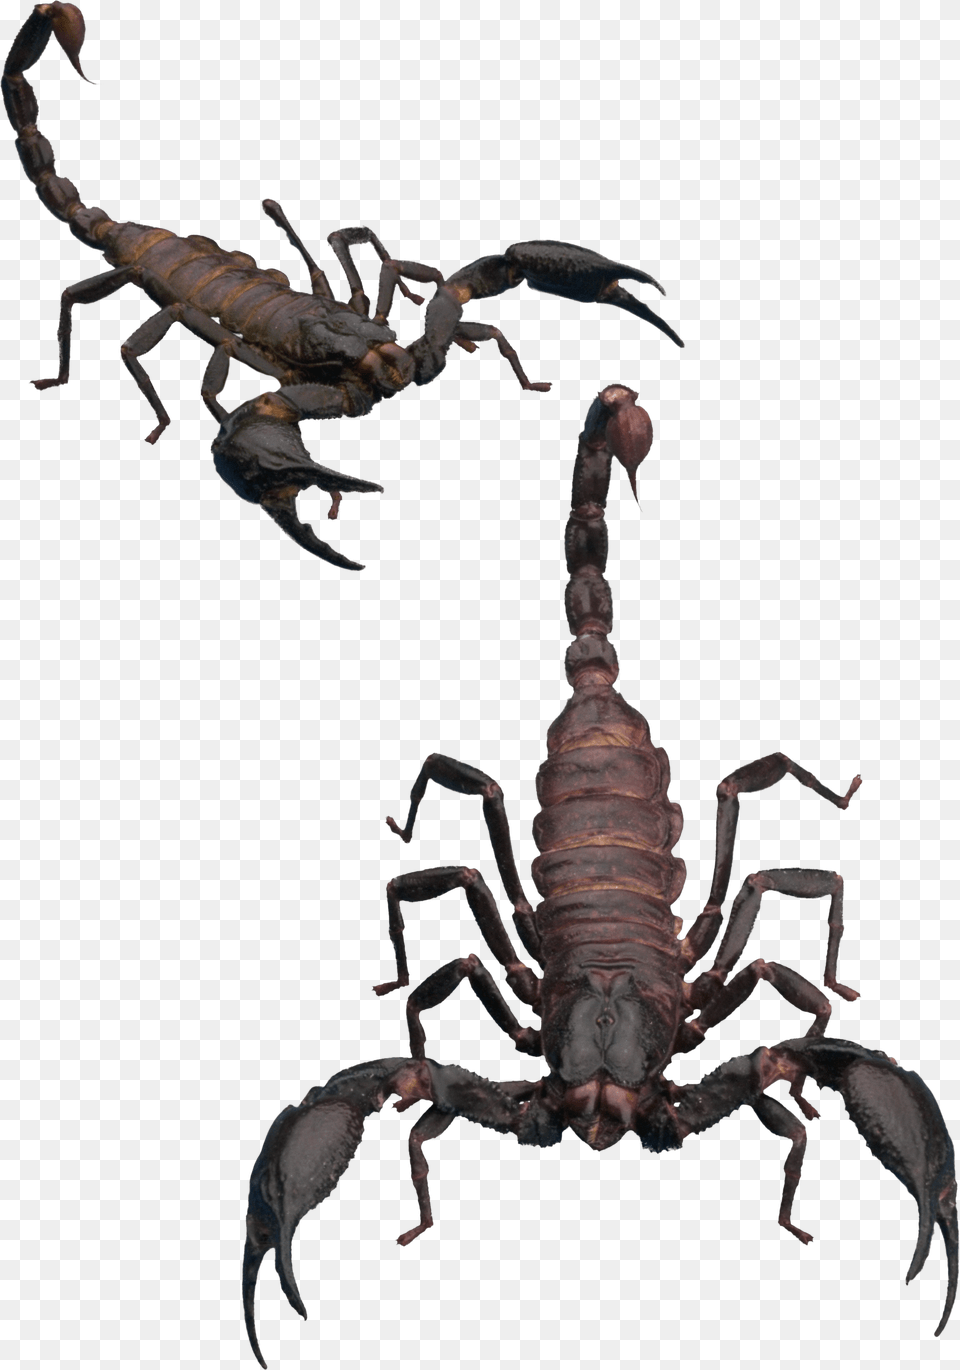 Transparent Background Scorpion, Animal, Invertebrate, Insect, Food Png Image